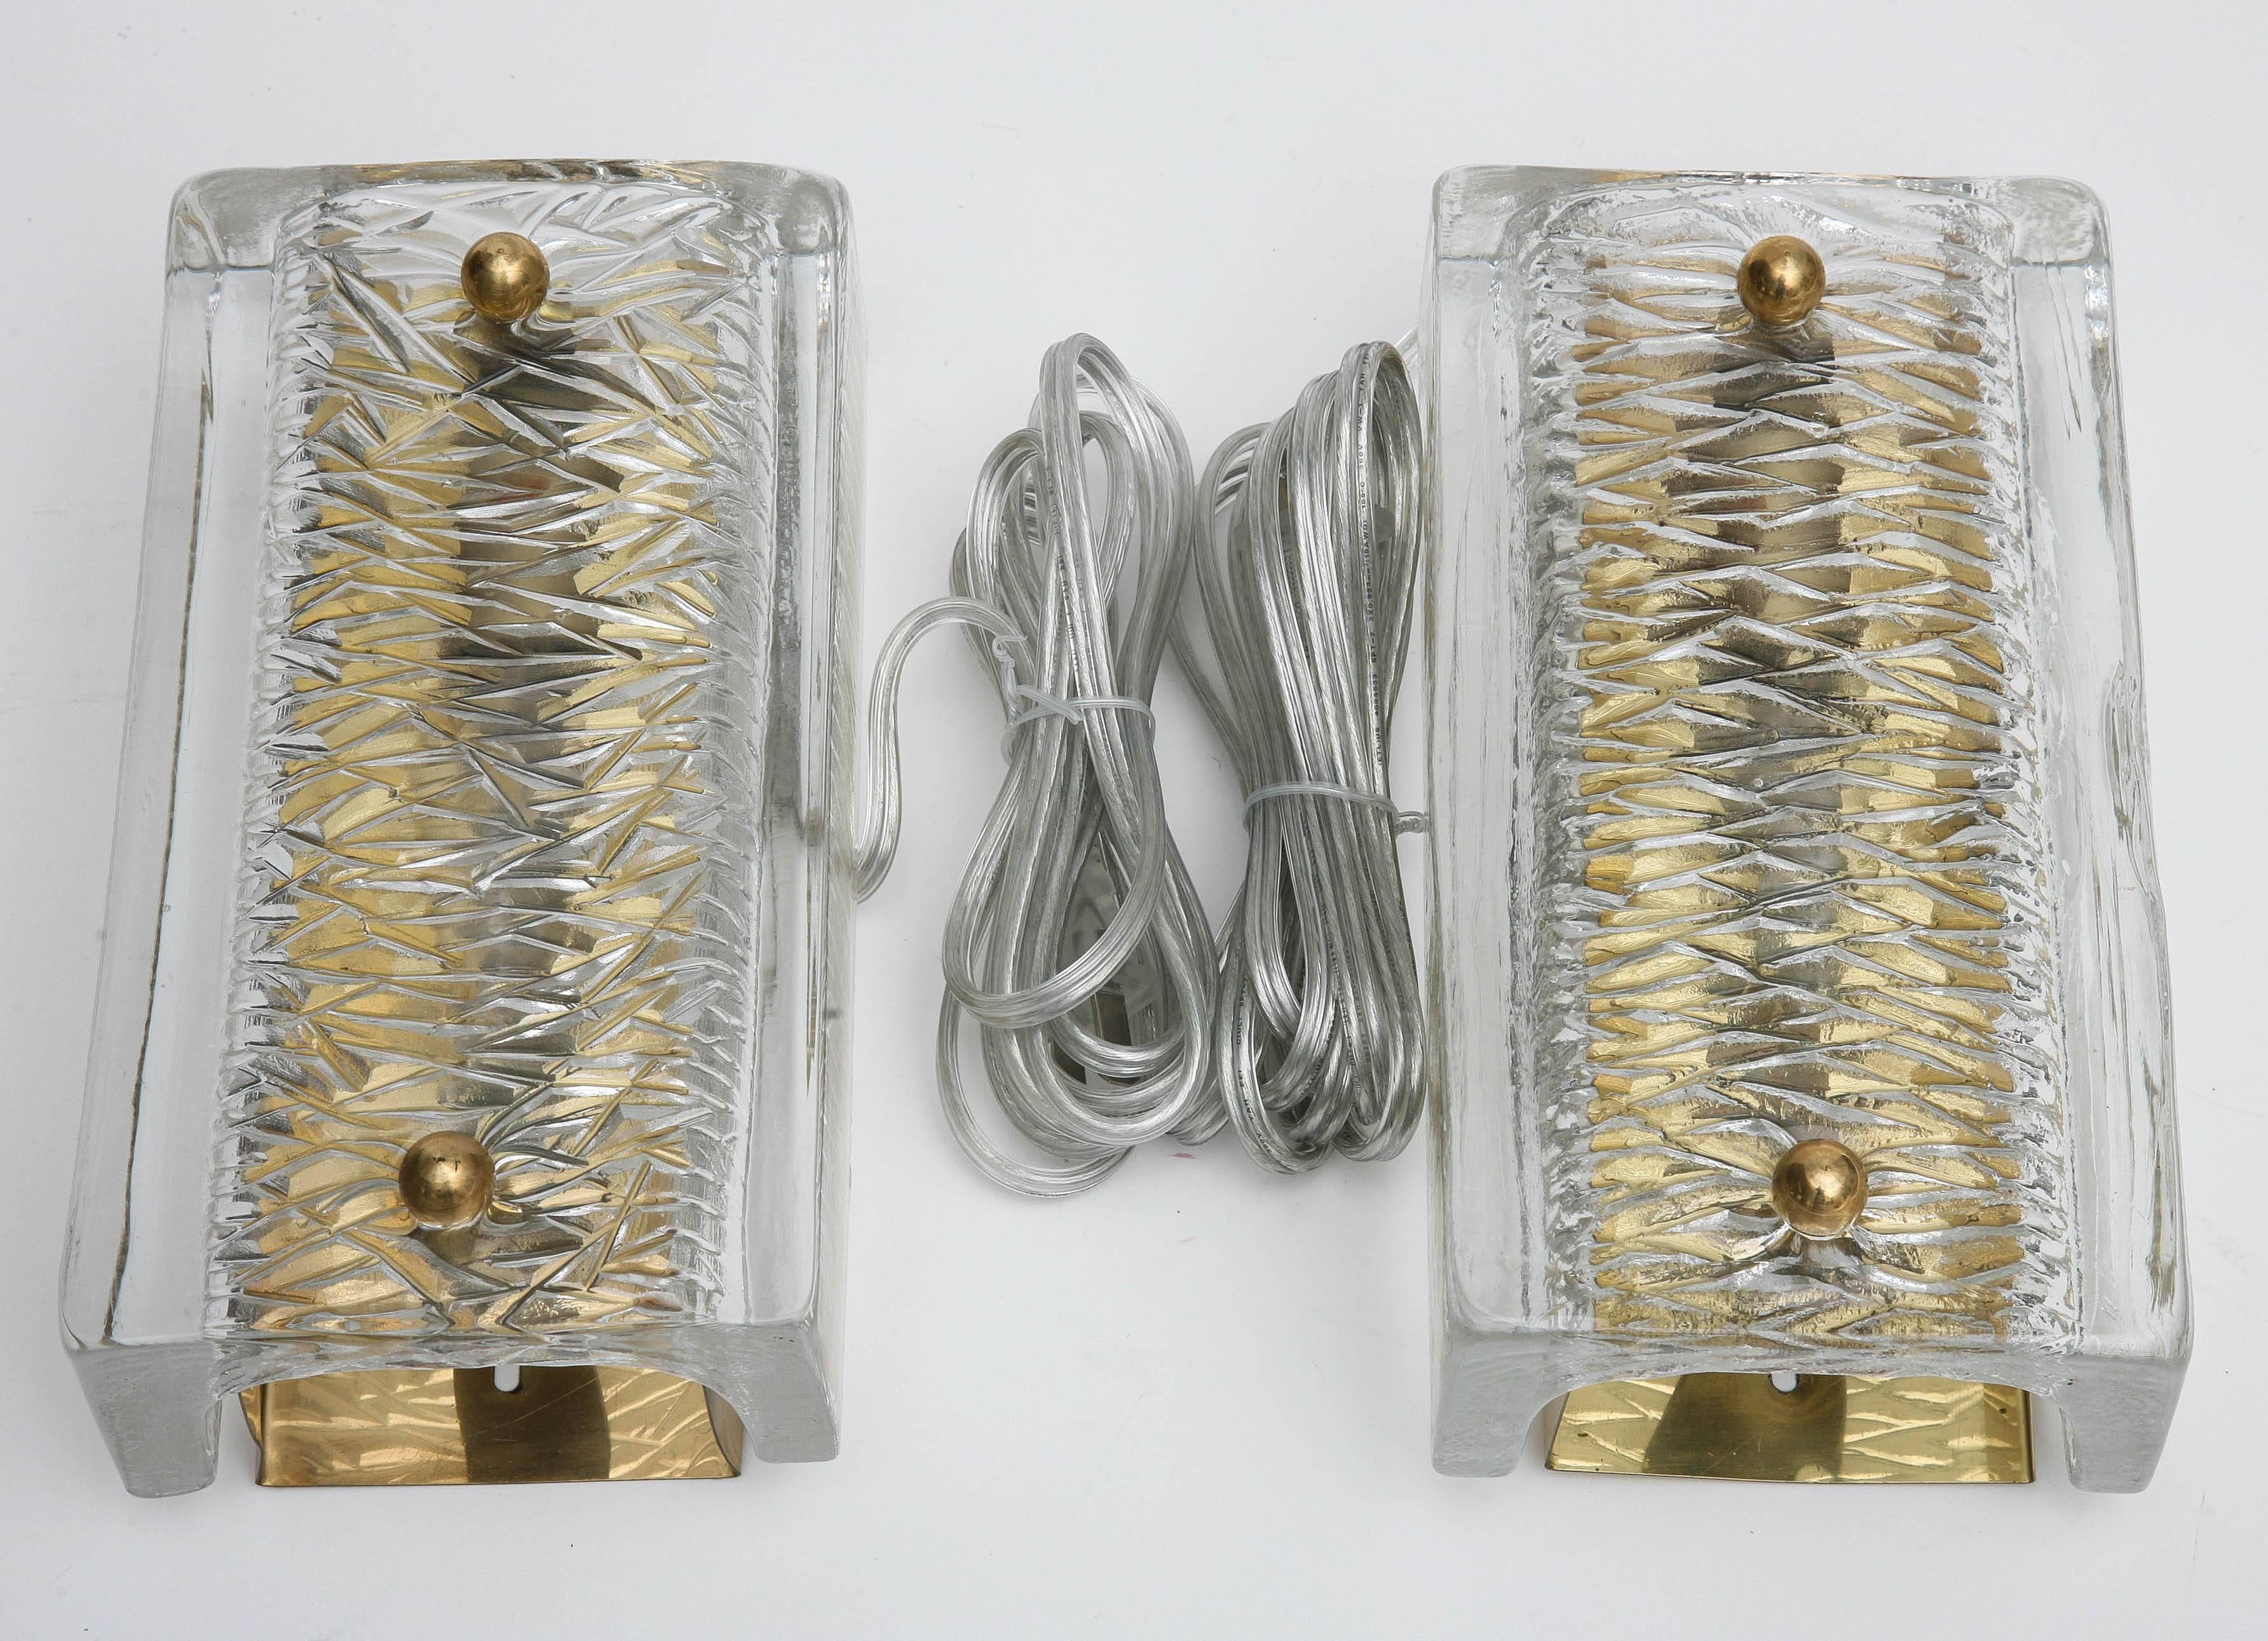 Pair of Orrefors crystal wall sconces by Carl Fagerlund, Swedish, 1960s.
The crystal cover have a linier texture on the inside surface, brass backplate,
with round brass connecters. They have been cleaned and rewired to US standards, each sconce